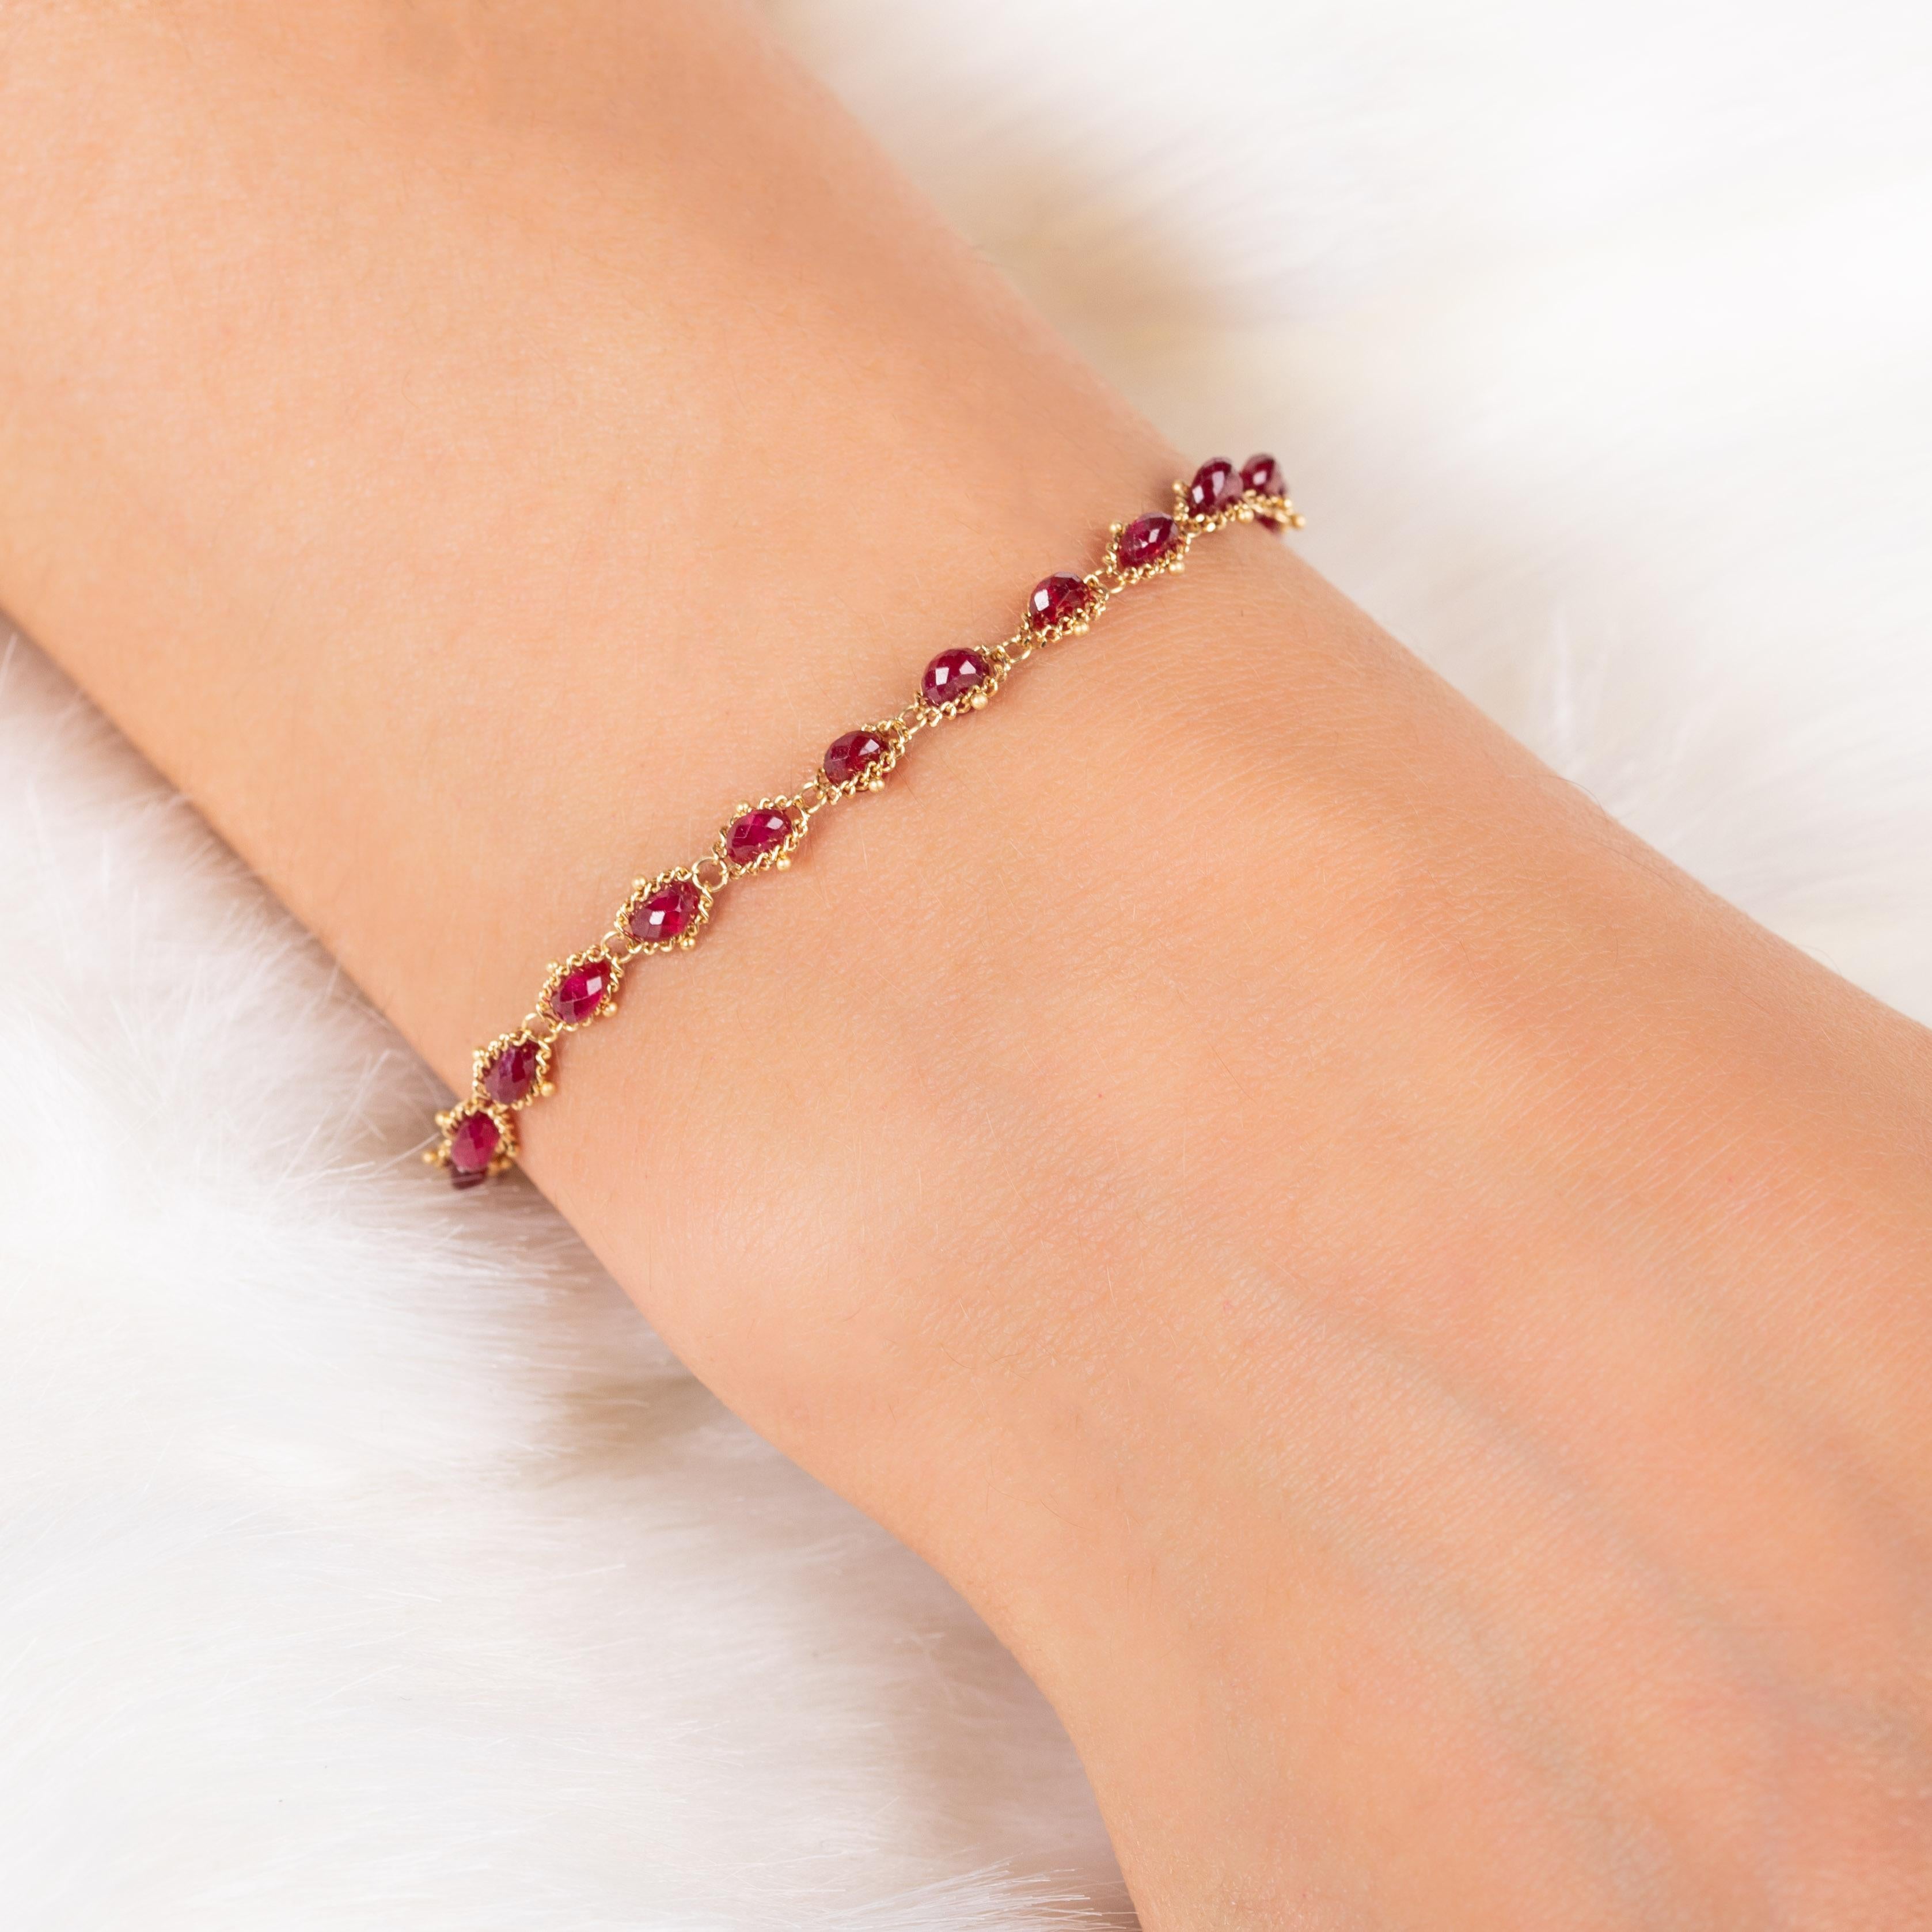 Fiery red Ruby beads light up this luxurious bracelet, which features a parade of beads meticulously hand-woven into a delicate web of 18K yellow gold chain. This bracelet is bold and striking, while still elegant and simplistic.  

Technical